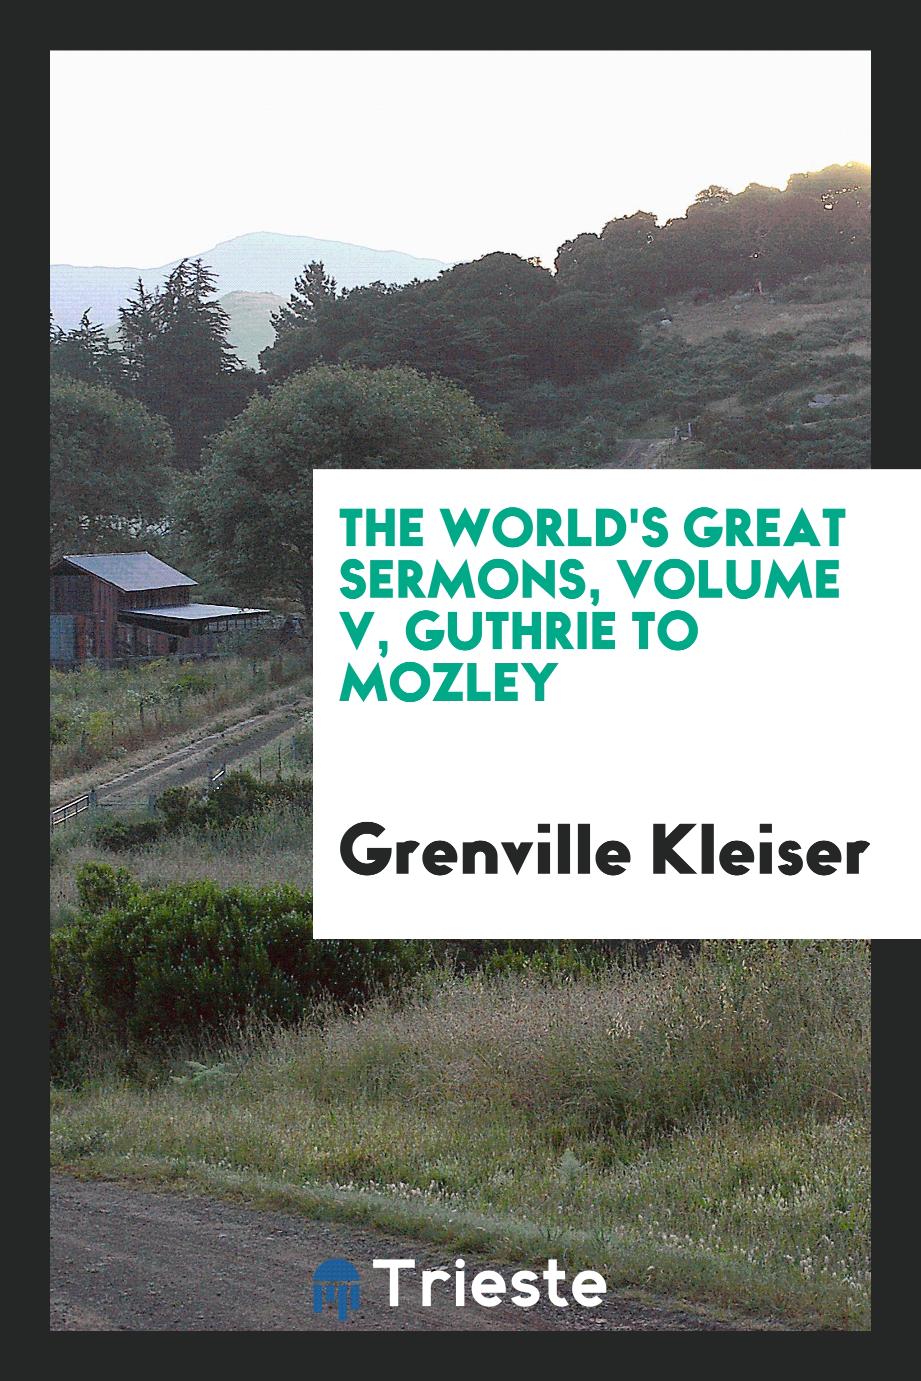 The World's Great Sermons, Volume V, Guthrie to Mozley